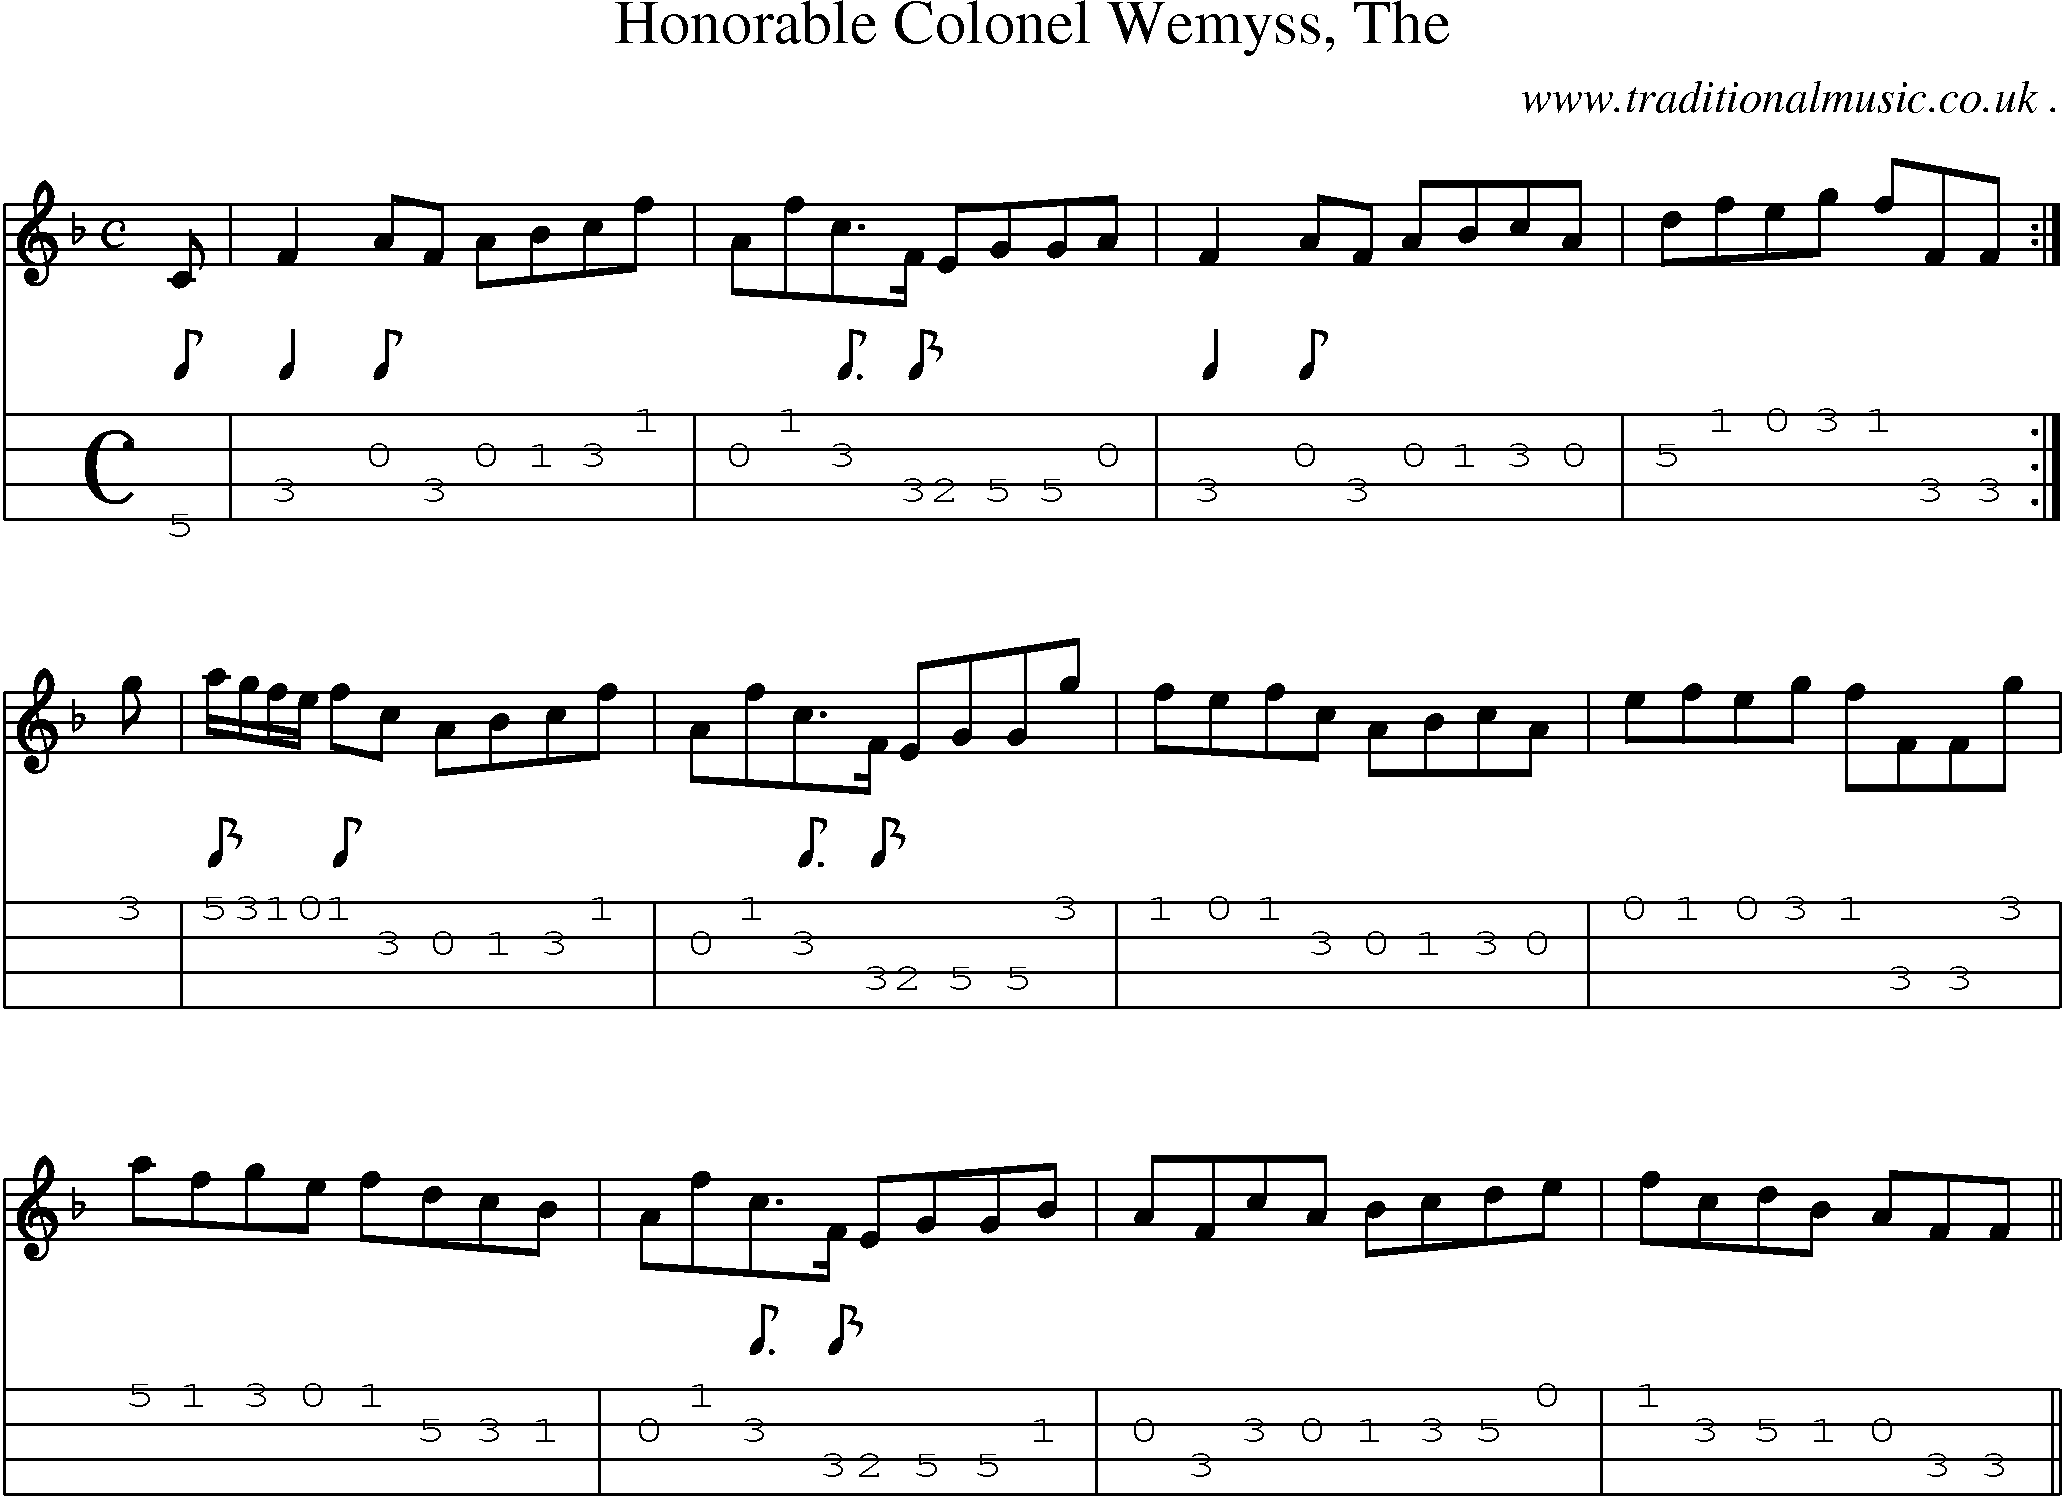 Sheet-music  score, Chords and Mandolin Tabs for Honorable Colonel Wemyss The